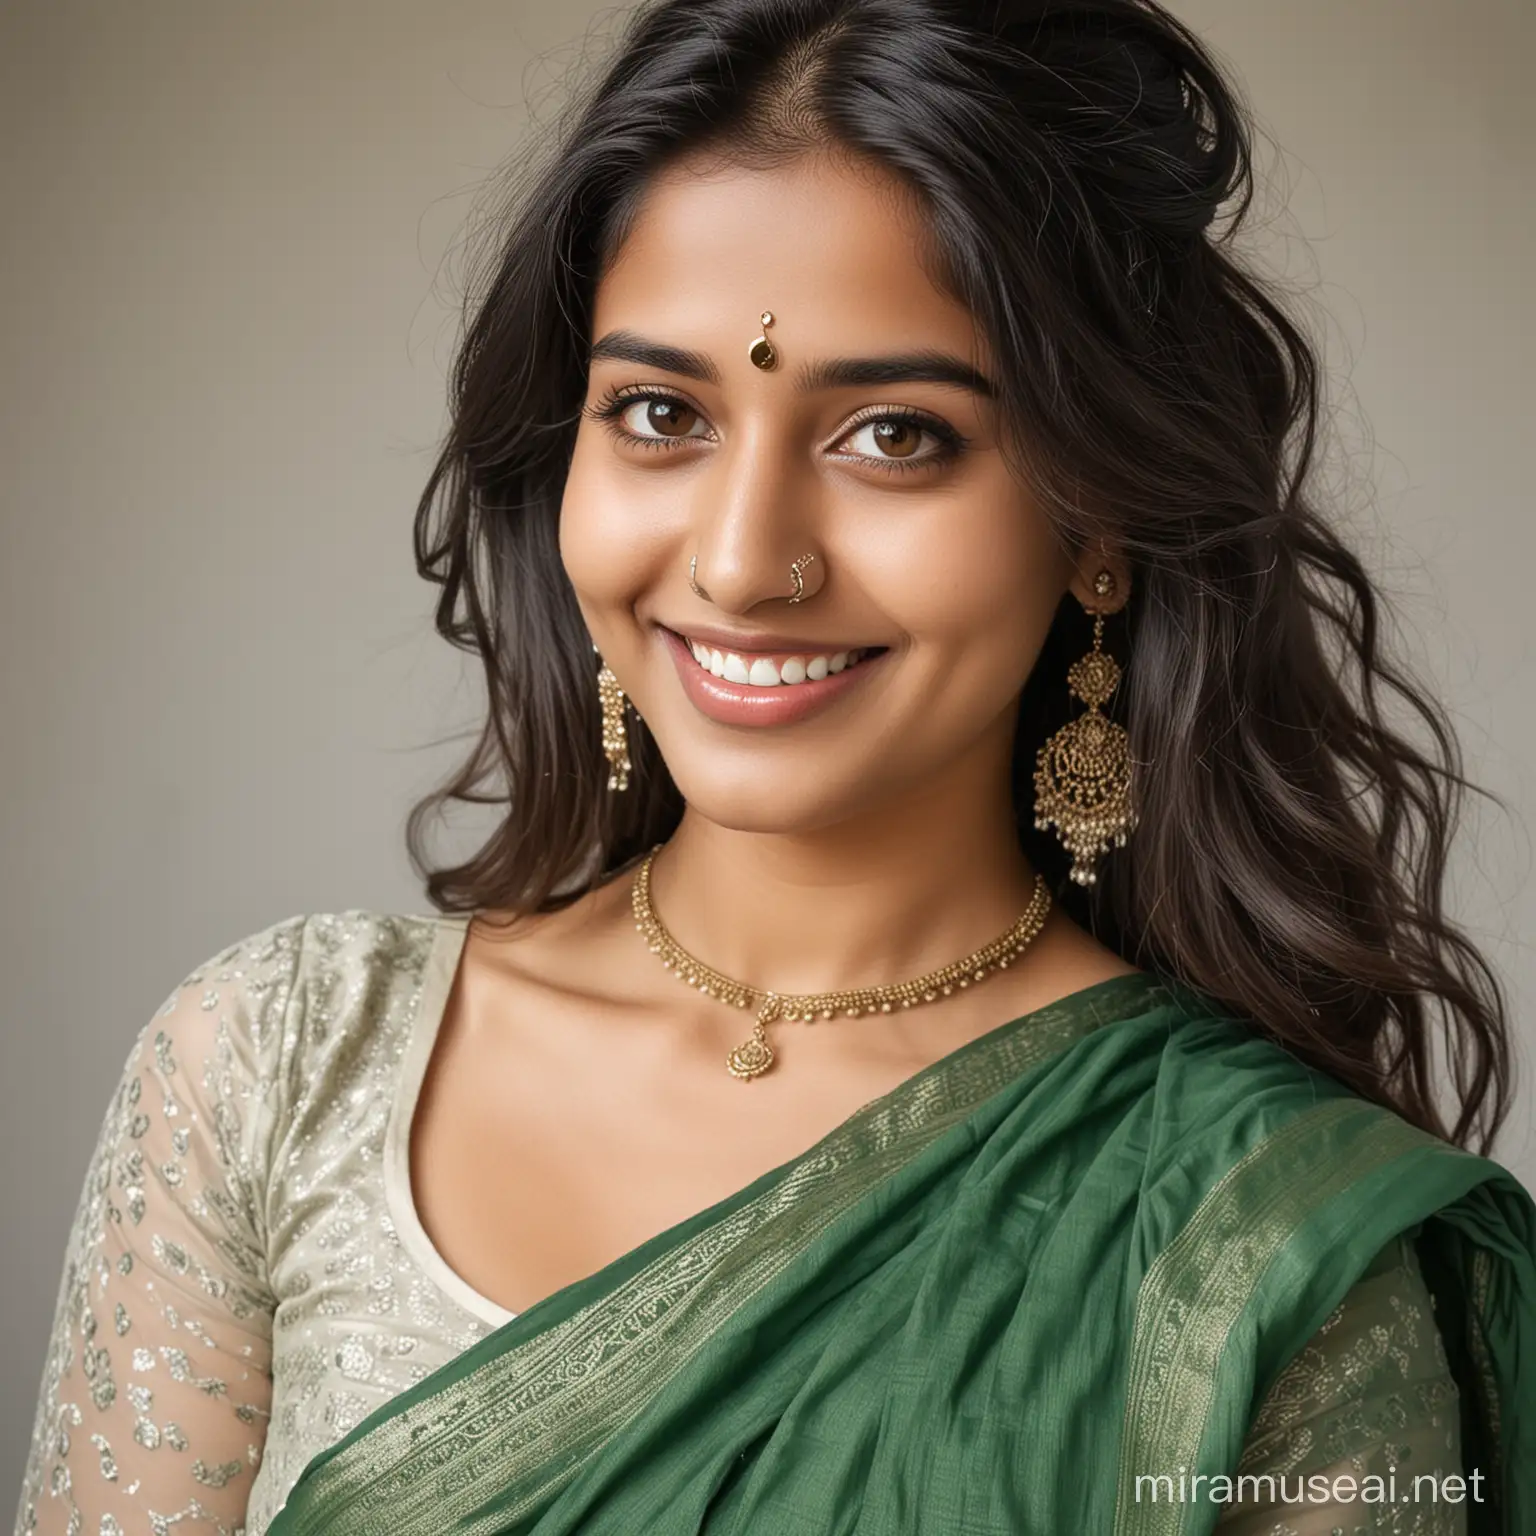 A beautiful white skinned Indian girl with thick loose hair, dressed in green saree and grey blouse with a long nose and a nose ring smiling. 